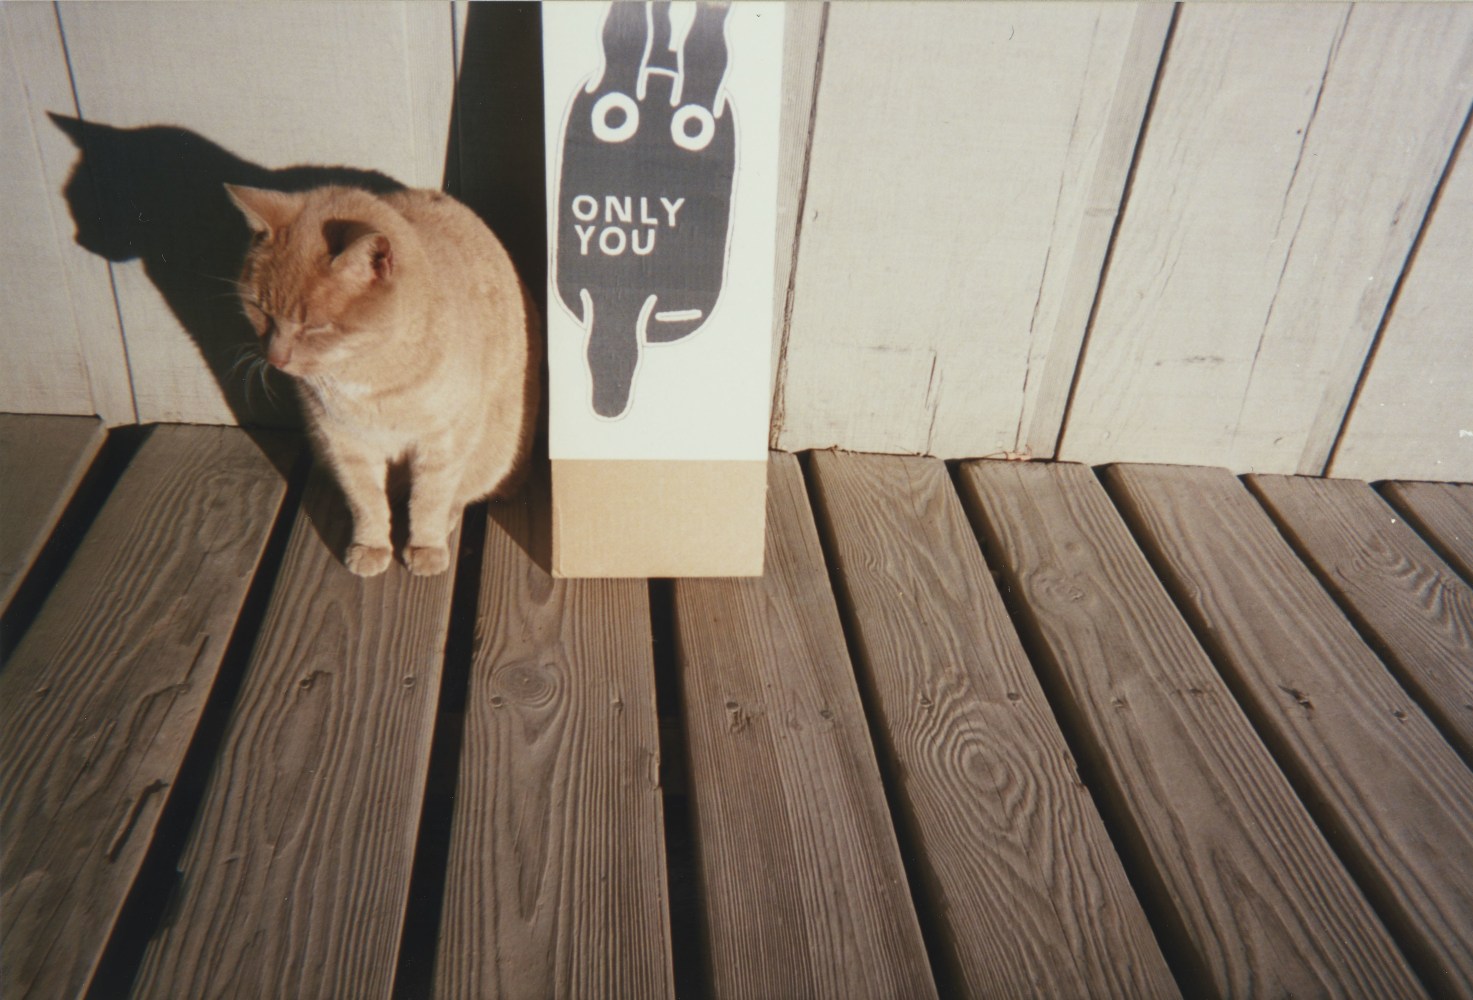 Ray Johnson,&amp;nbsp;Untitled (Cat and ONLY YOU), December 31, 1994,&amp;nbsp;Commercially processed chromogenic print, 6 &amp;times; 4 in., The Morgan Library &amp;amp; Museum